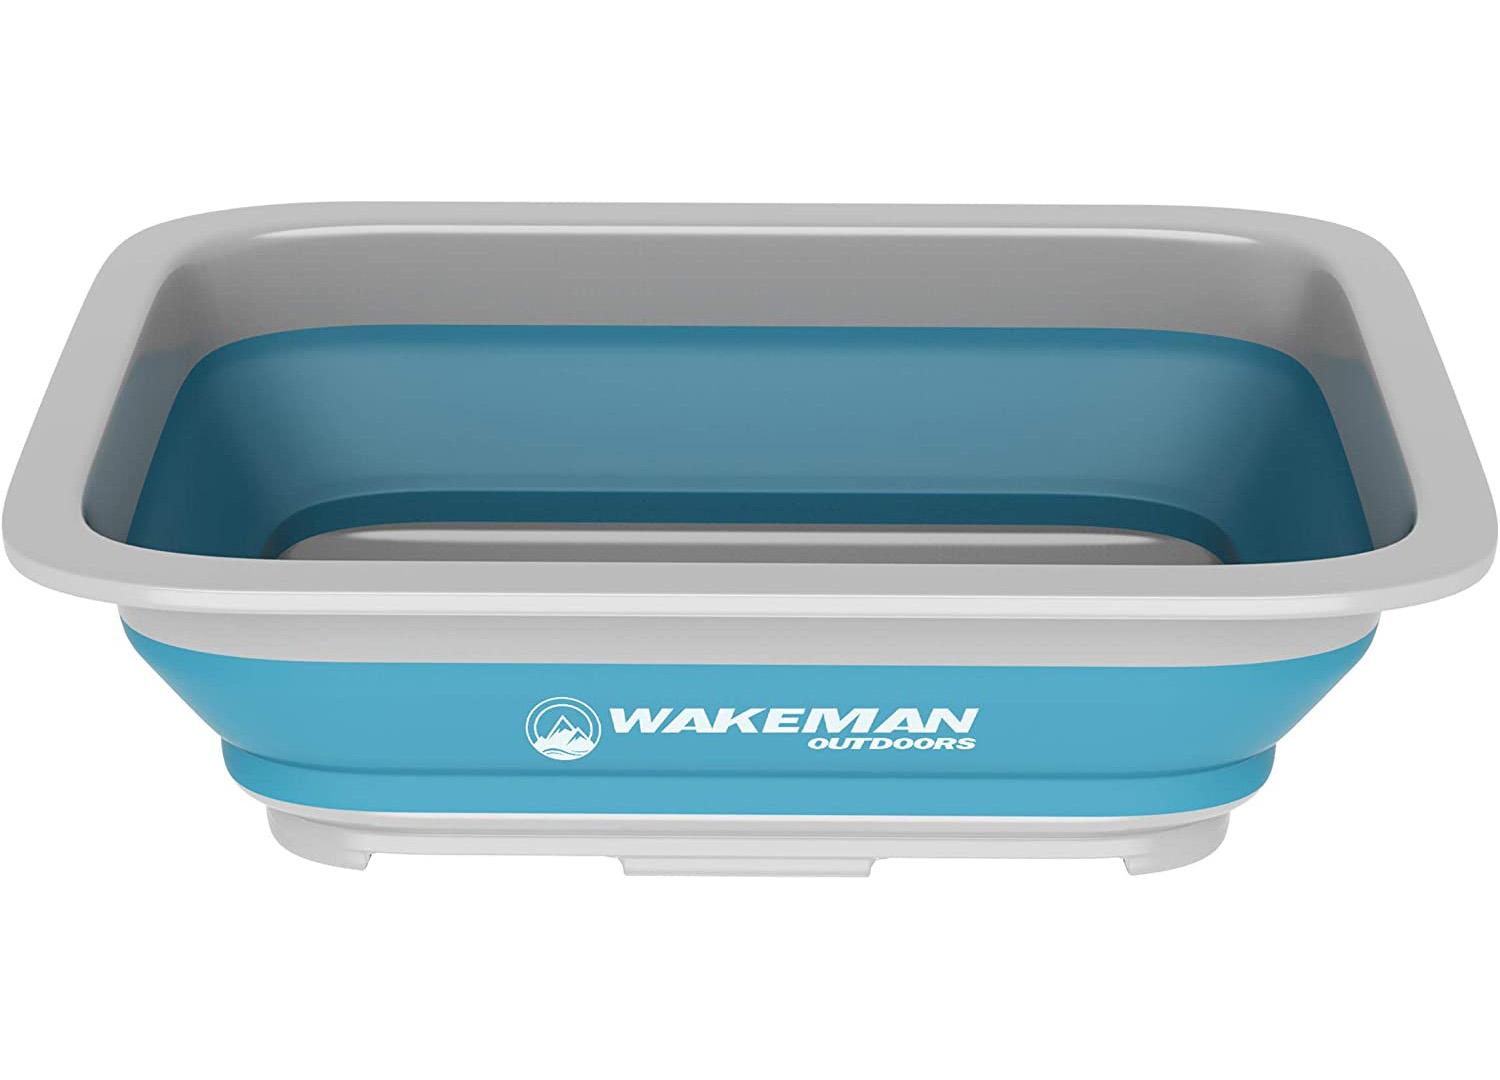 Wakeman Outdoors Collapsible Multiuse Portable Wash Basin for $7.96